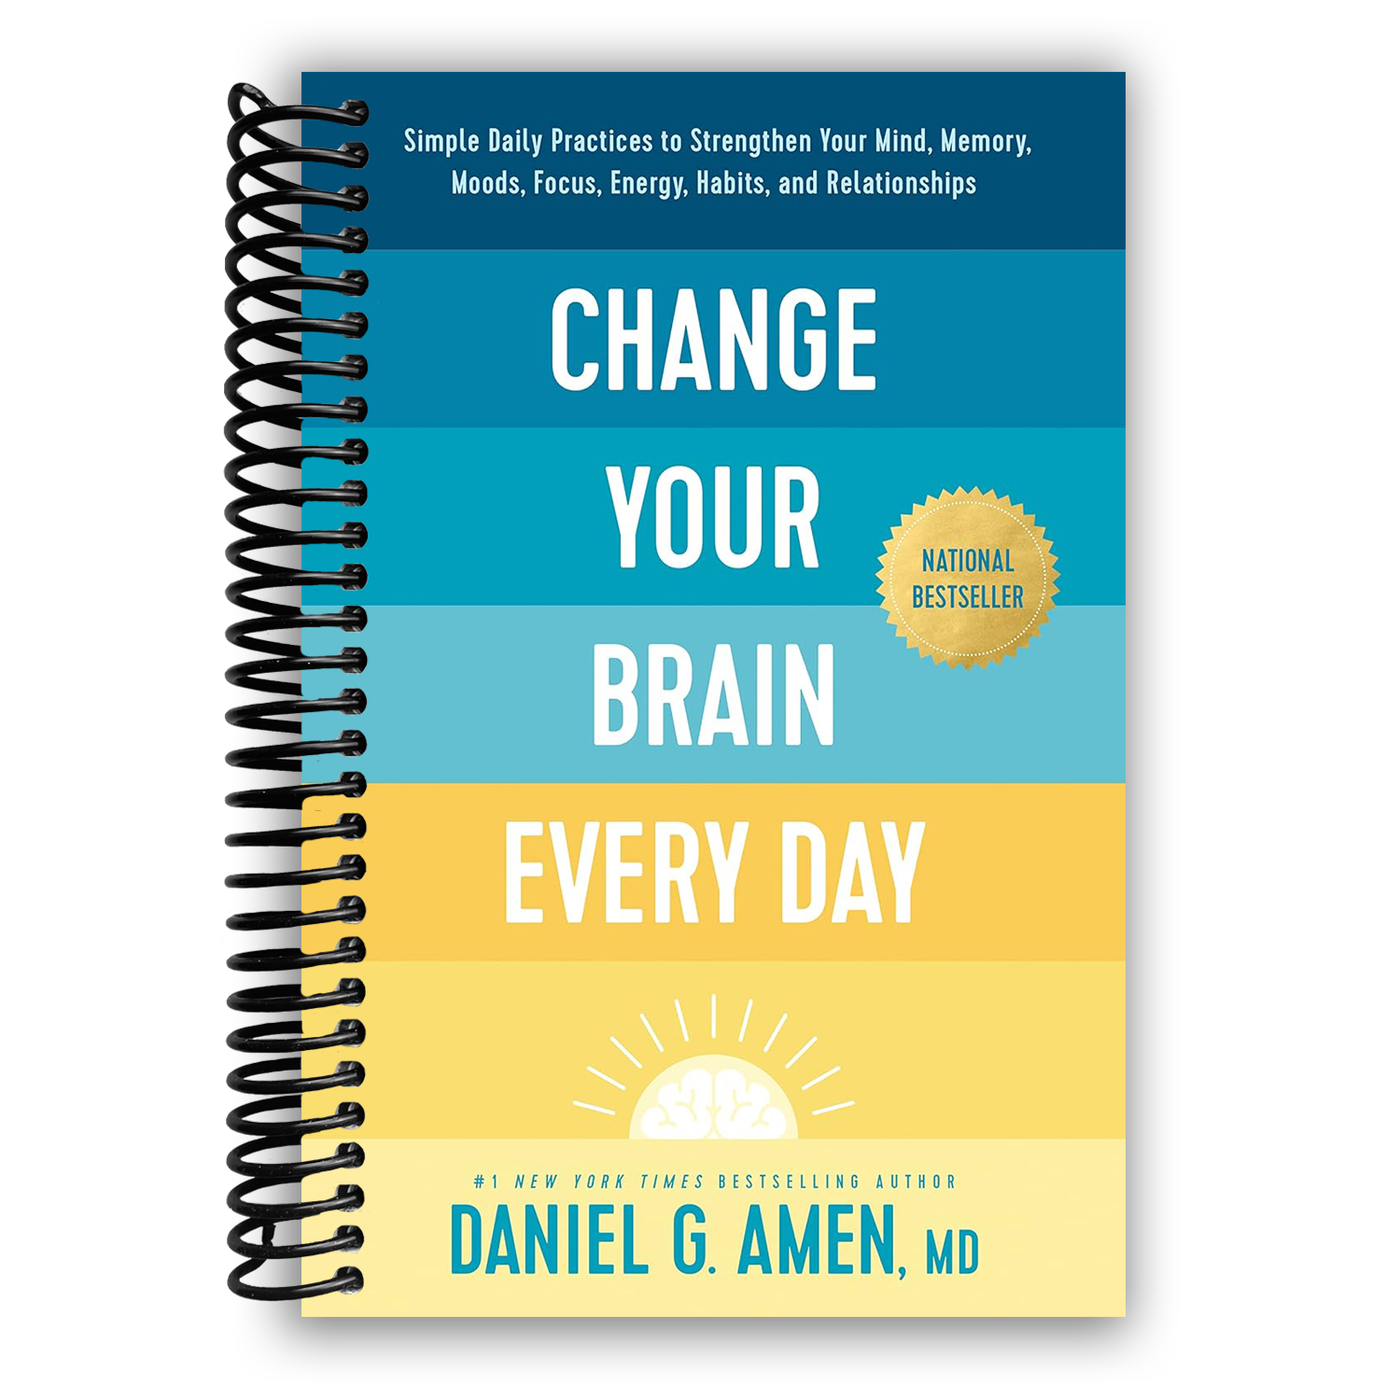 Change Your Brain Every Day: Simple Daily Practices to Strengthen Your Mind, Memory, Moods, Focus, Energy, Habits, and Relationships (Spiral Bound)